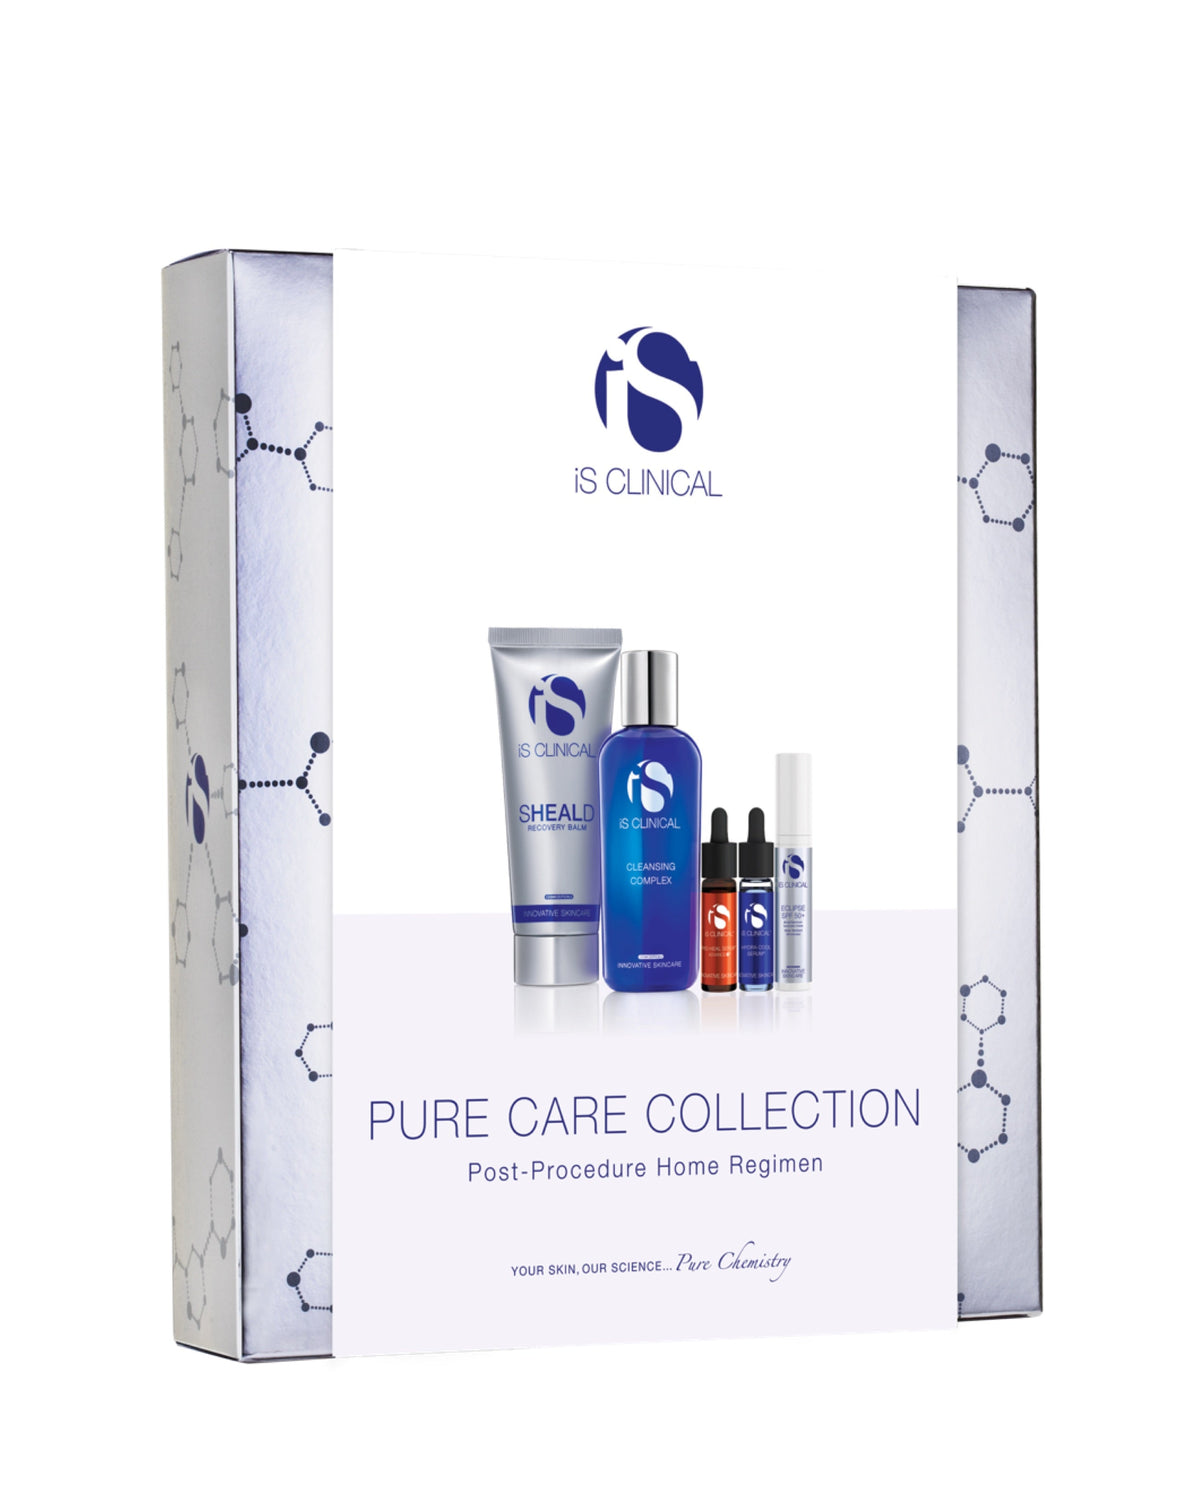 iS Clinical Pure Care Collection - Post-Procedure Home Regimen 60ml, 60g, 3.75ml, 3.75ml, 10g